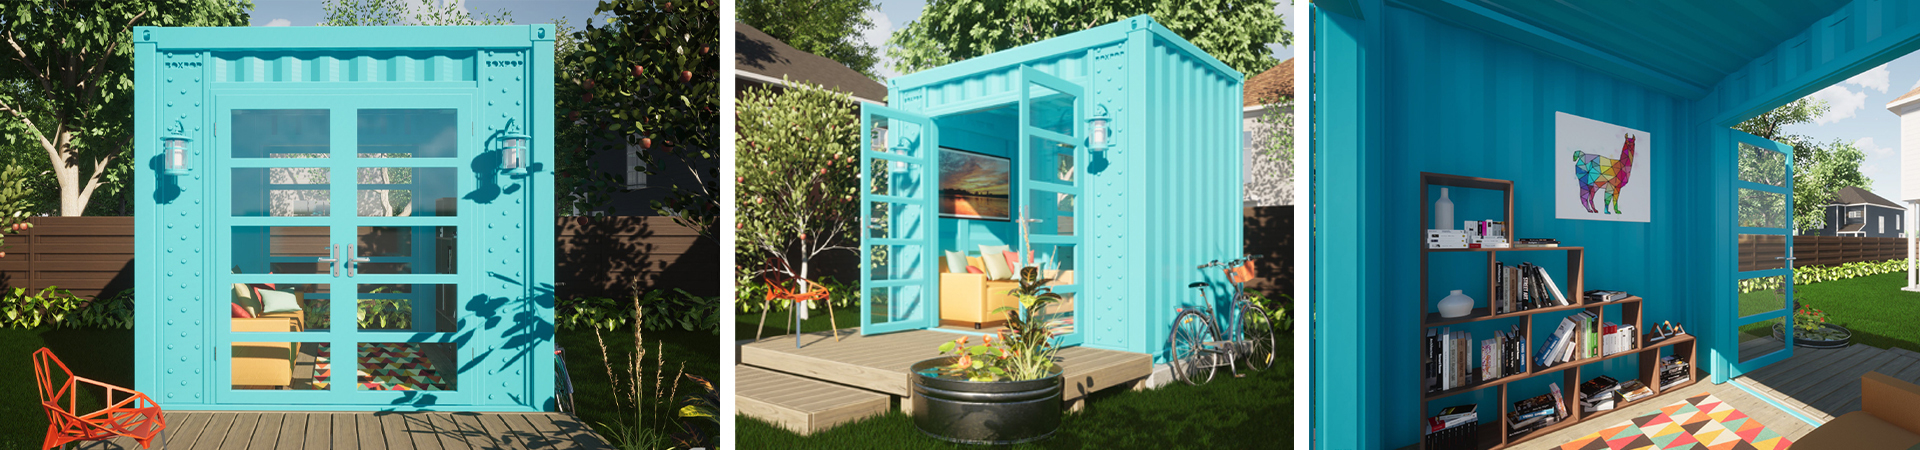 Custom shipping container office and artist space in a backyard.